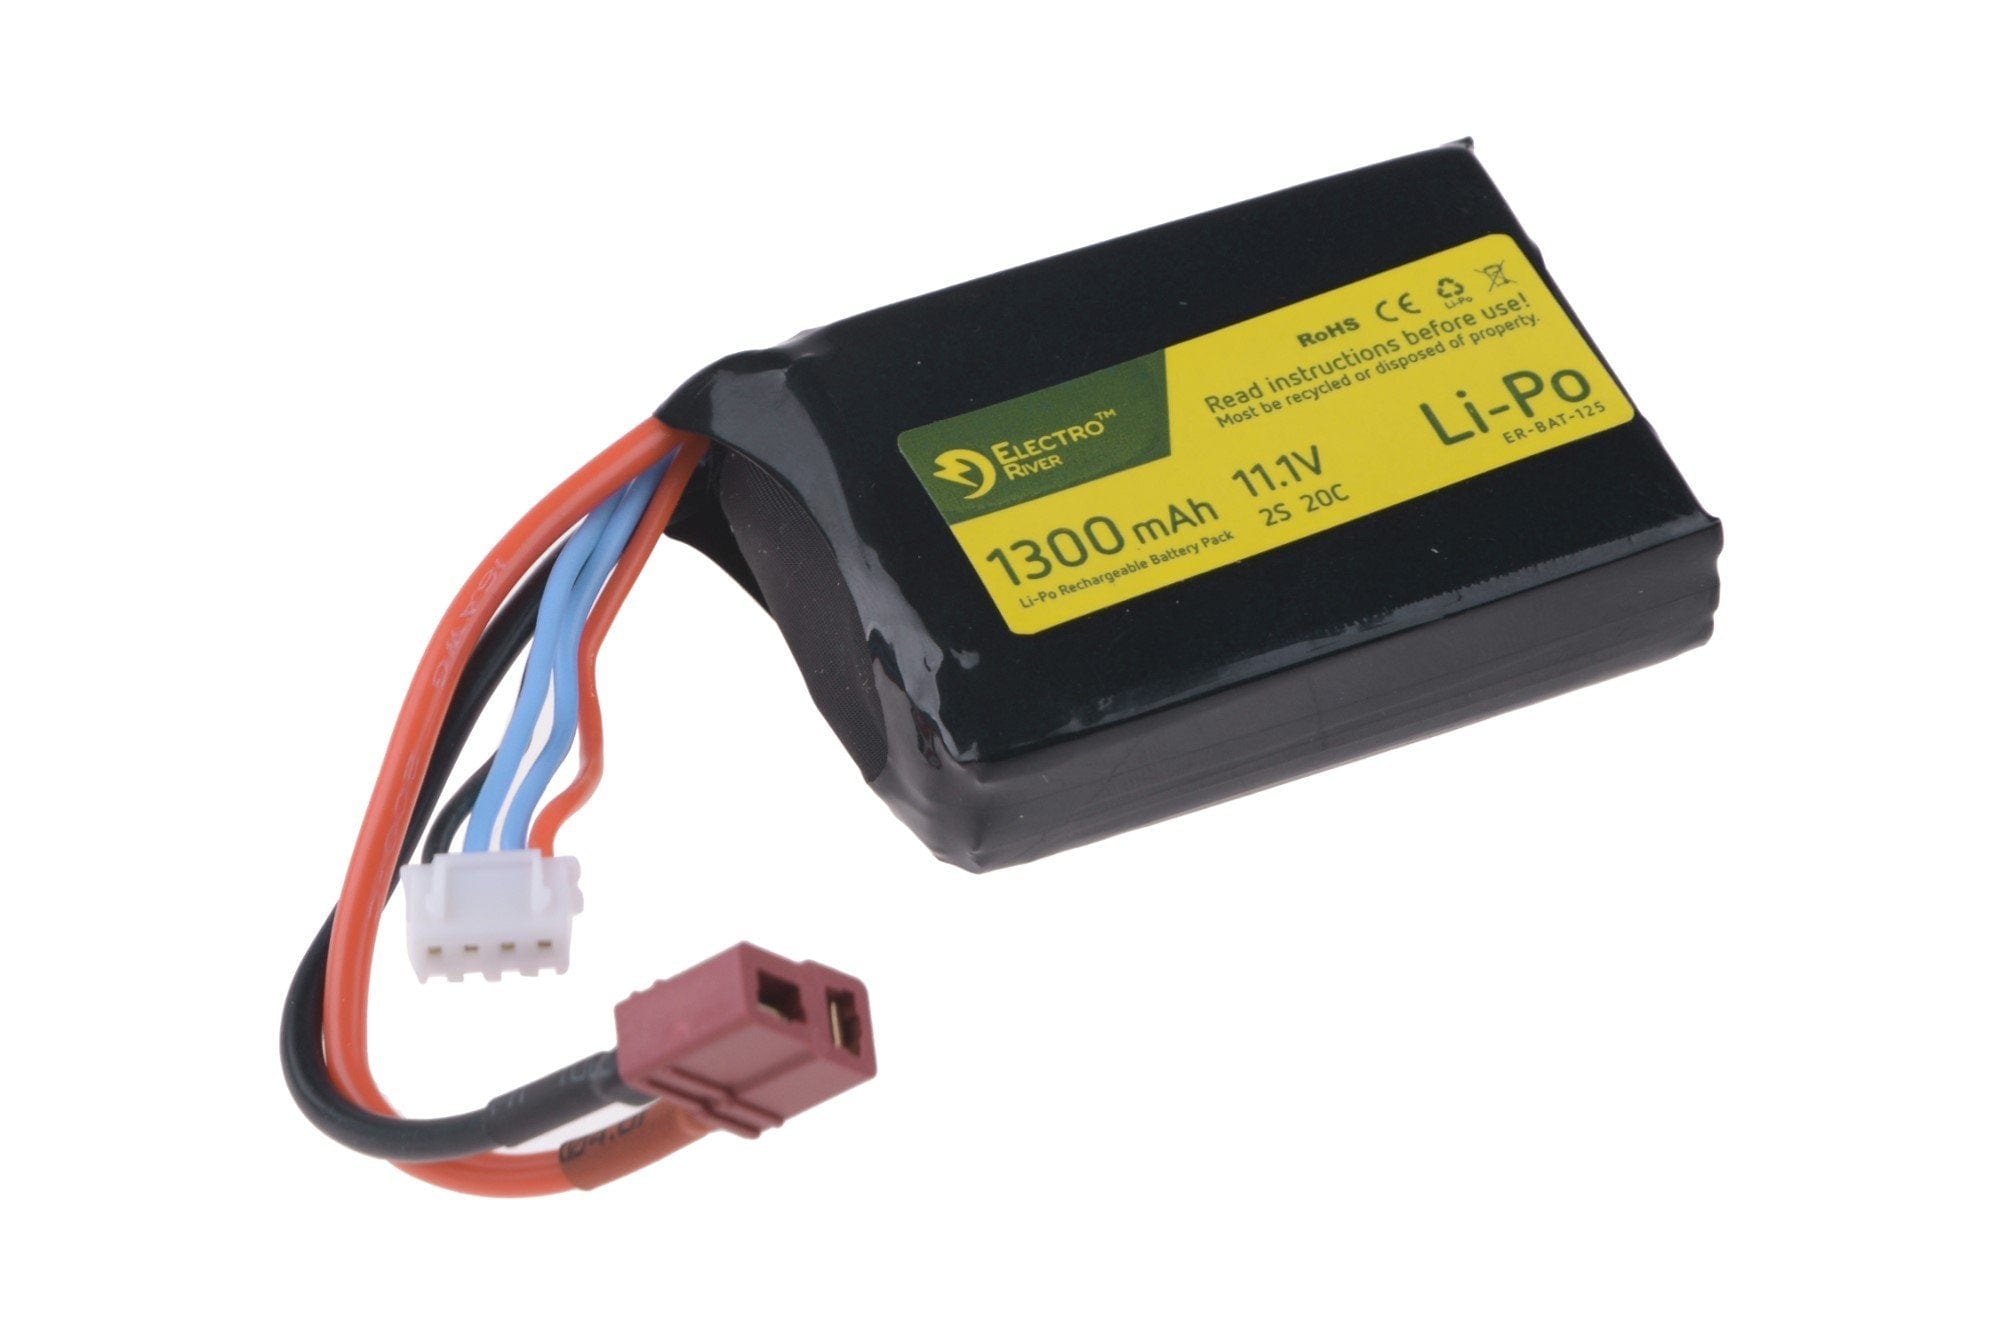 LiPo 11.1V 1300mAh 20/40C Battery - AN/PEQ Size - T-Connect (Deans) by Electro River on Airsoft Mania Europe